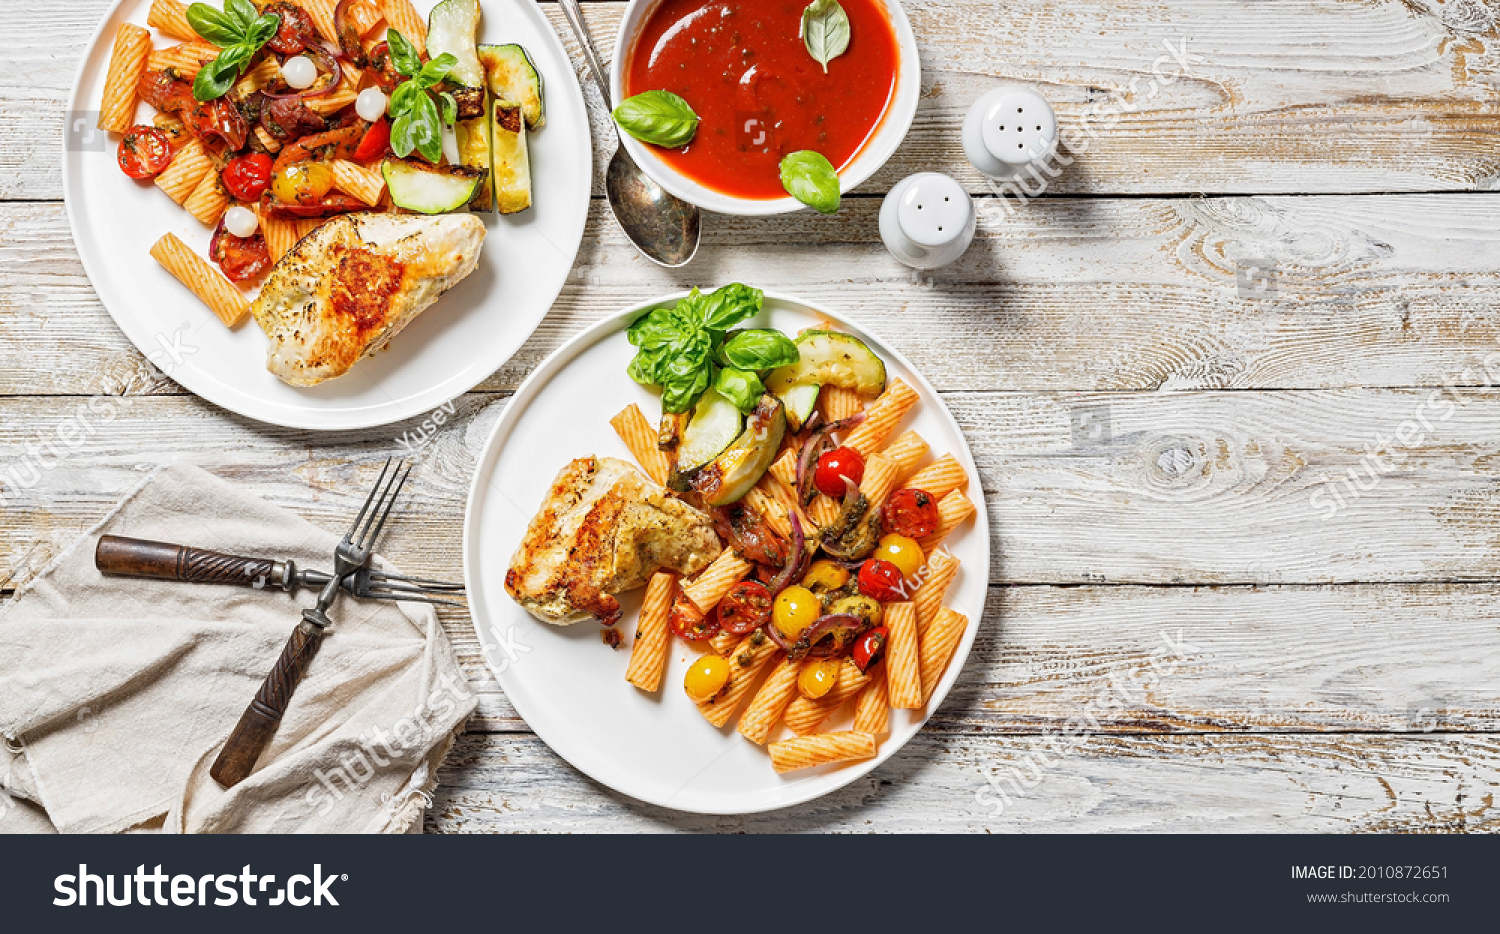 Food banner. Grilled turkey fillet, penne pasta with tomatoes, spices, Parmesan cheese and fresh basil. Tomato sauce. Traditional Italian cuisine. Two servings on a wooden background. Copy space #2010872651